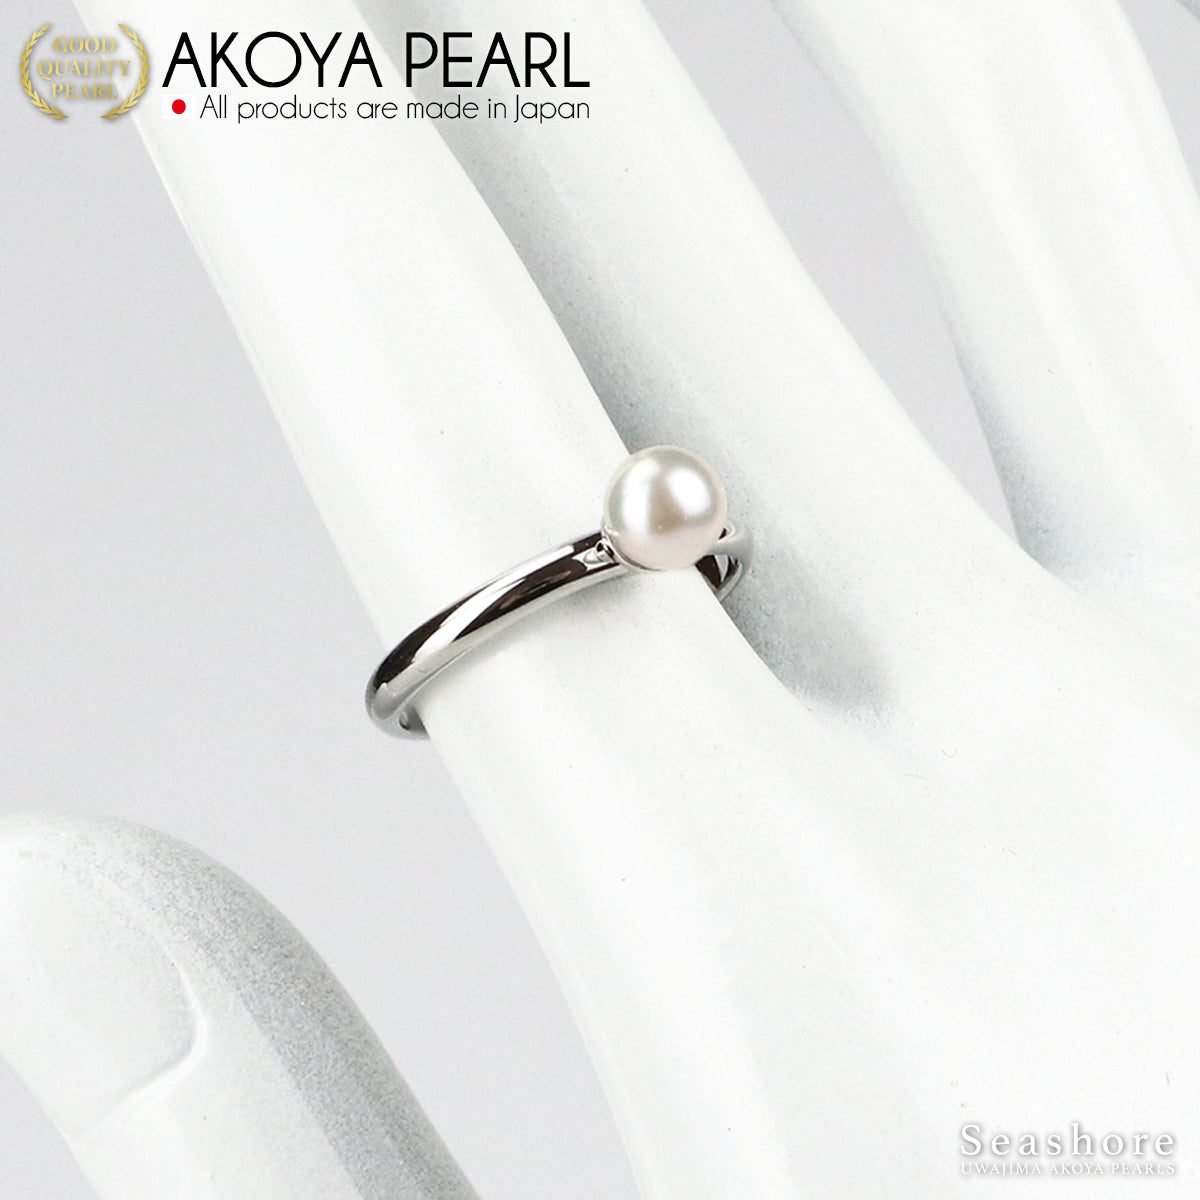 Baby Pearl Petit Pearl Ring 5.0-6.0mm White Brass Silver/Gold Free Size Akoya Pearl